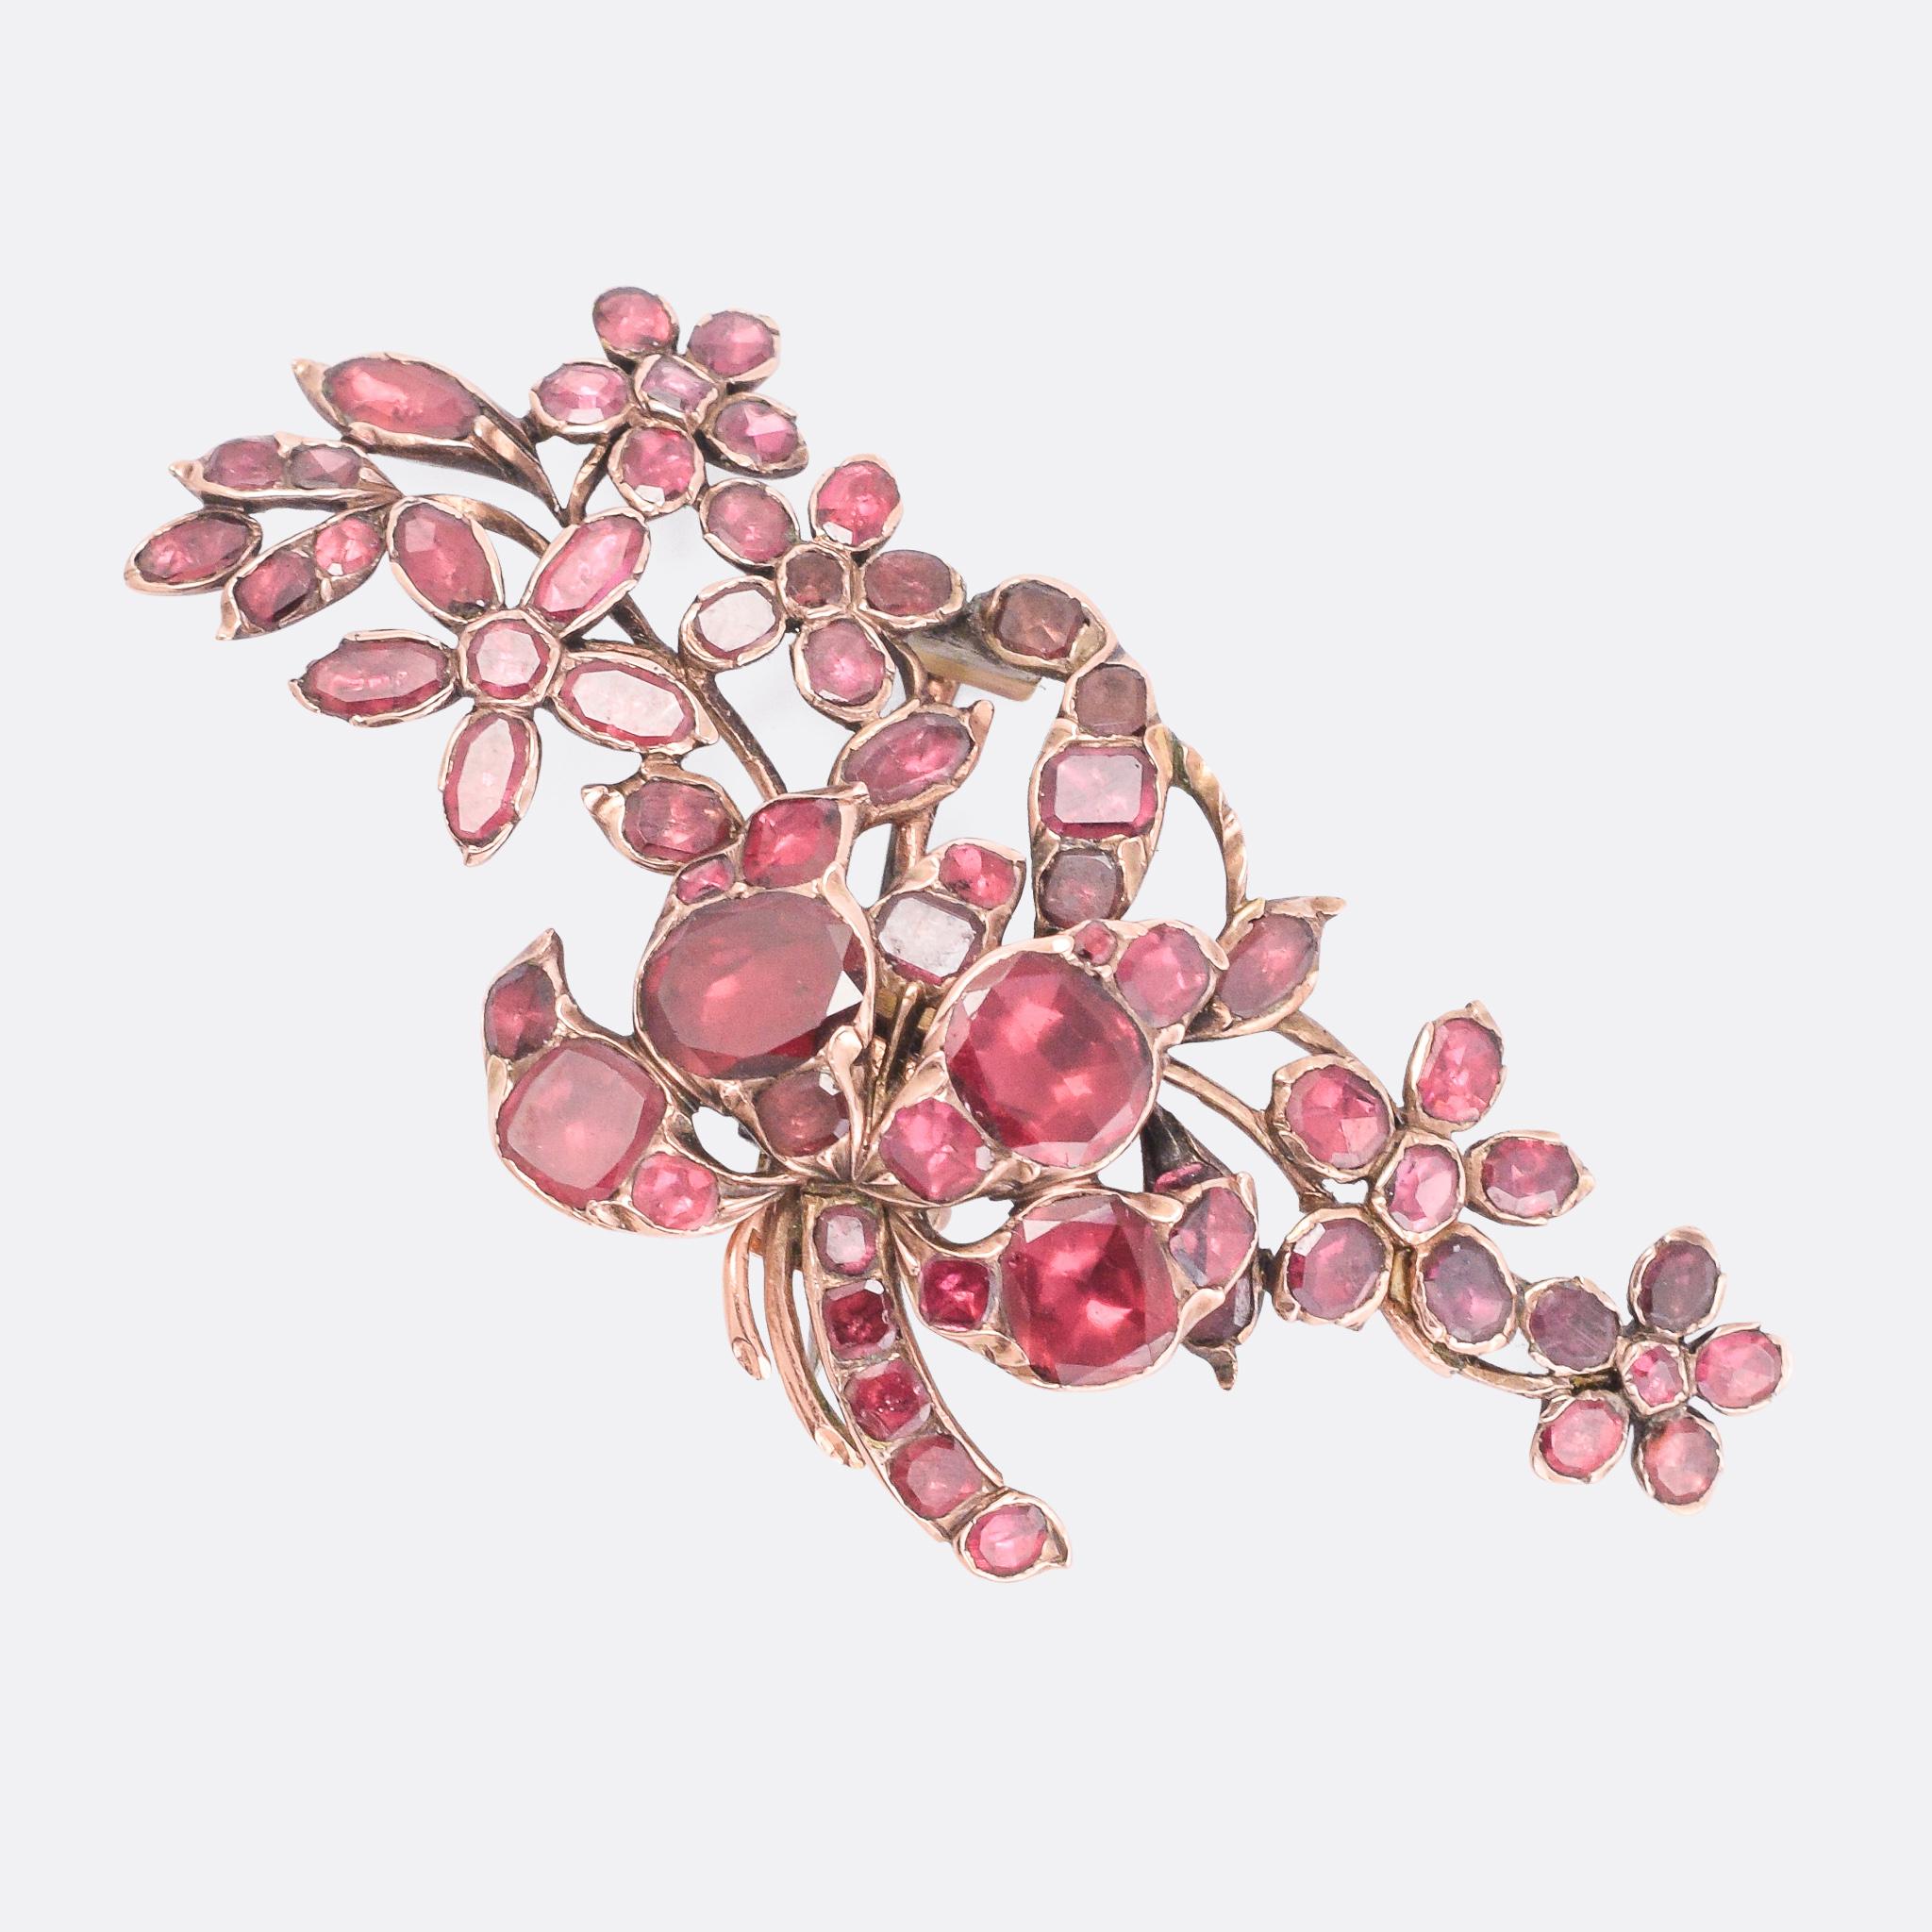 A stunning Georgian Giardinetti Aigrette (aka hair-piece) dating from the late 18th Century, circa 1790. It's set with juicy foil backed garnets, and quite wonderfully depicts a bouquet of flowers. It's skilfully crafted, with bright and vibrant